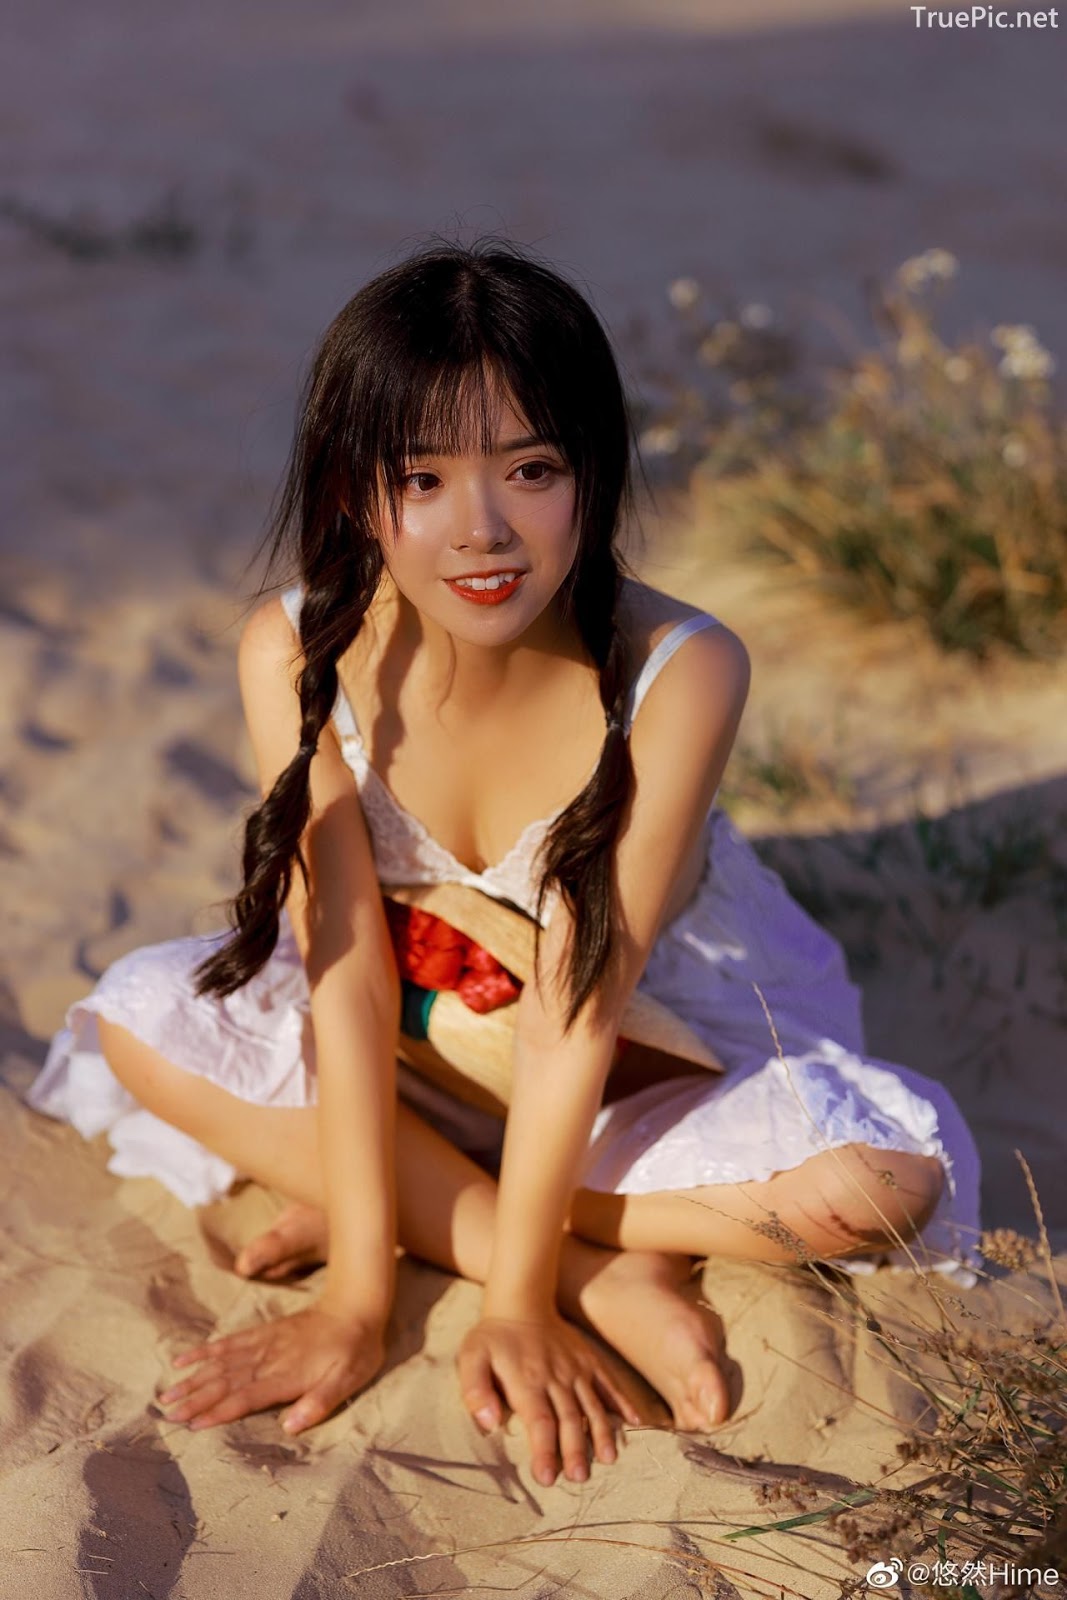 Chinese bautiful angel - Stay with you on a beautiful beach - TruePic.net - Picture 18